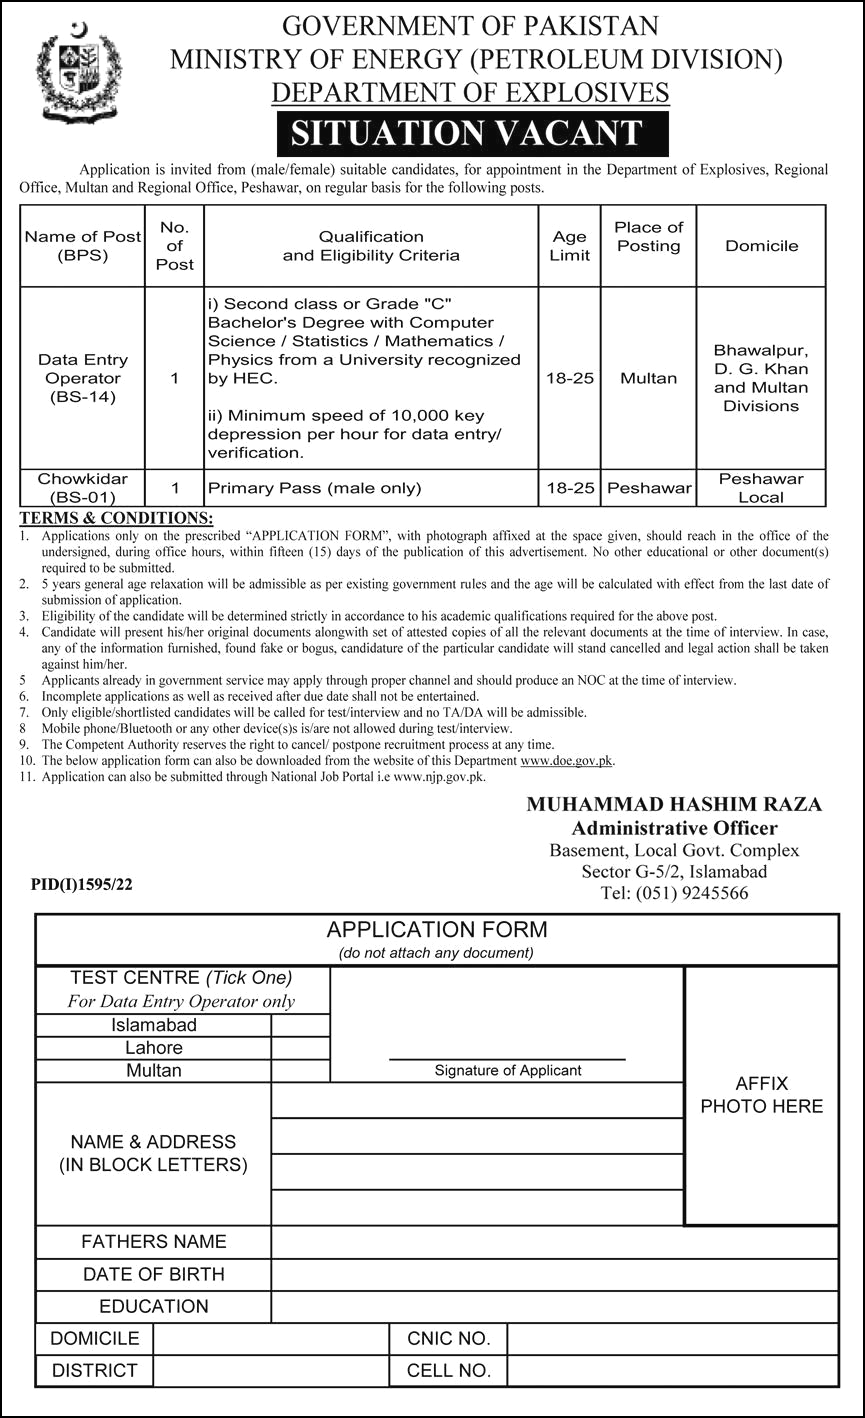 Latest in Jobs Pakistan 2022 – Ministry of Energy Federal Jobs 2022